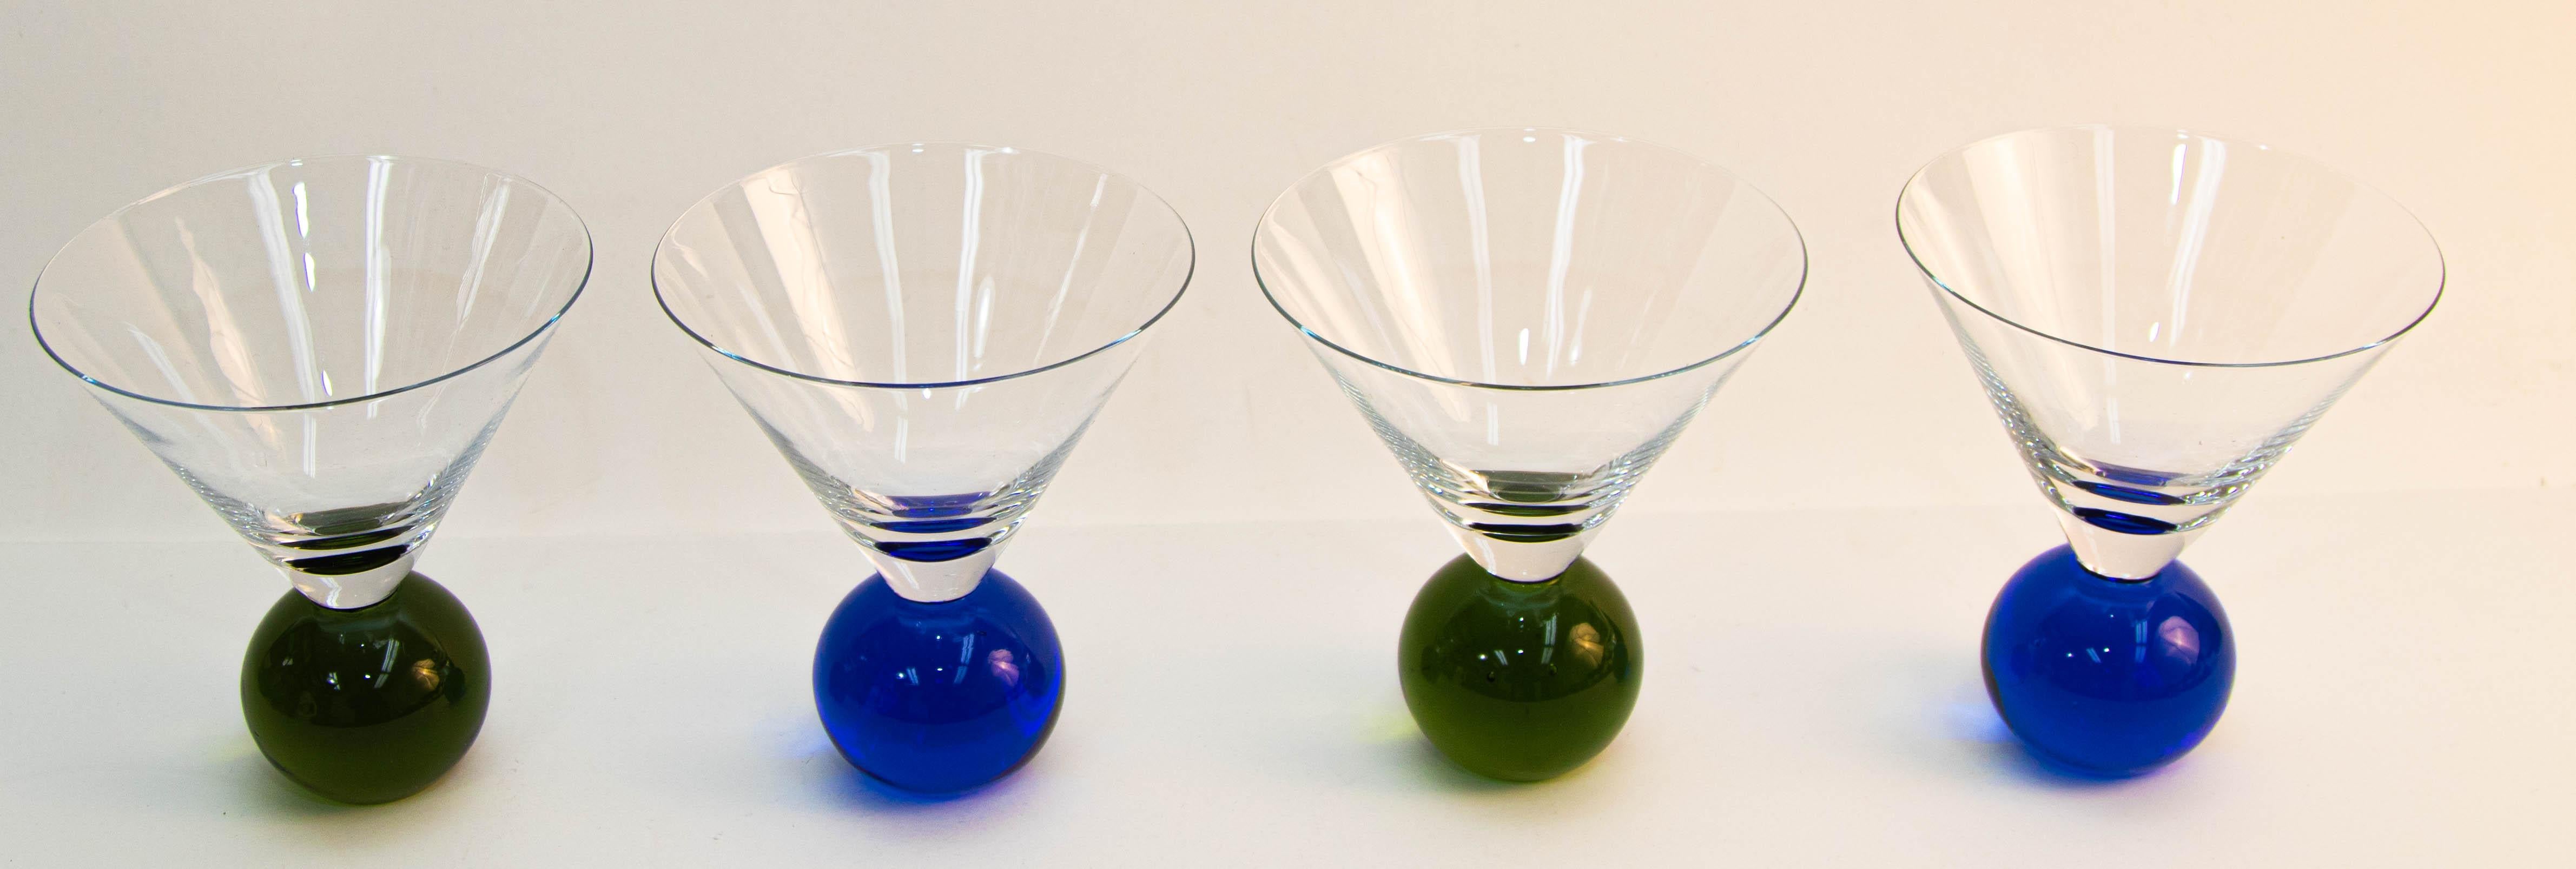 Postmodern ball base martini cocktail glasses, set of 4, circa 1990.
Vintage Post Modern set of four Memphis style clear martini cocktail glasses.
Postmodern Martini glasses, sitting on top of each ball is a crystal clear bowl bowl that opens up